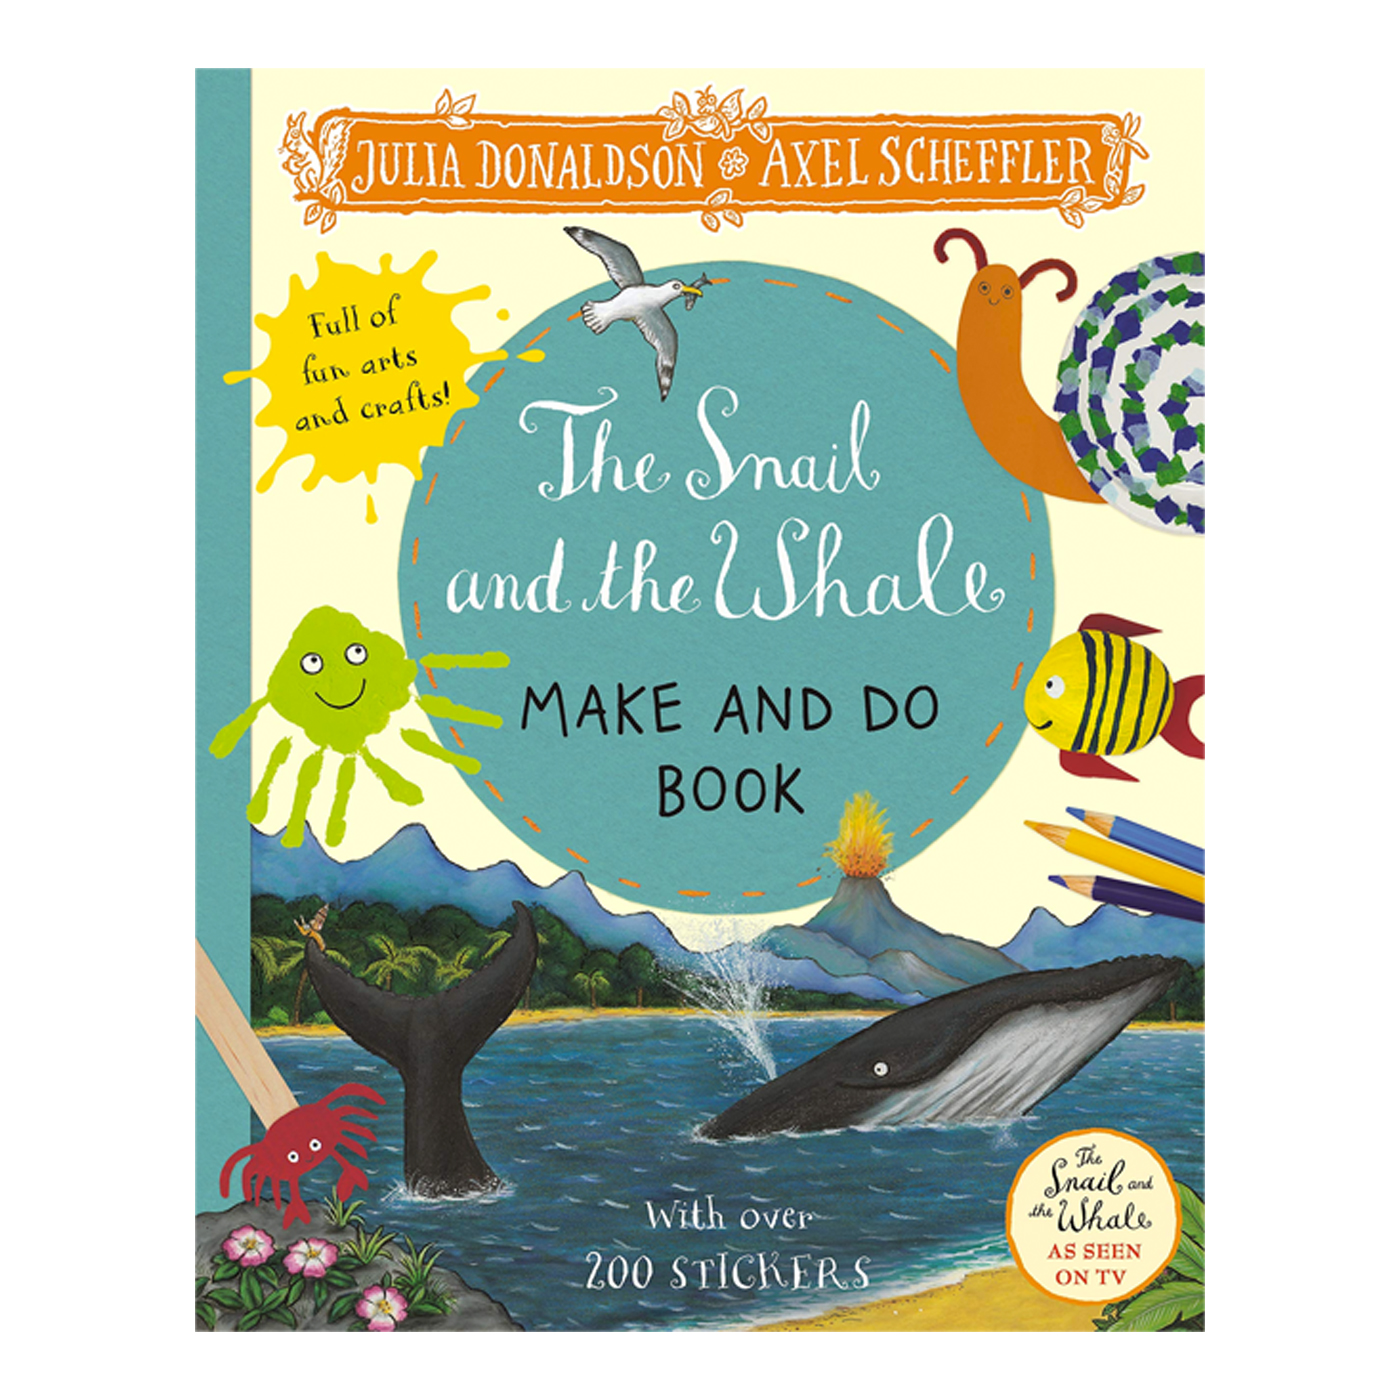 PAN MACMILLAN The Snail and the Whale Make and Do Book